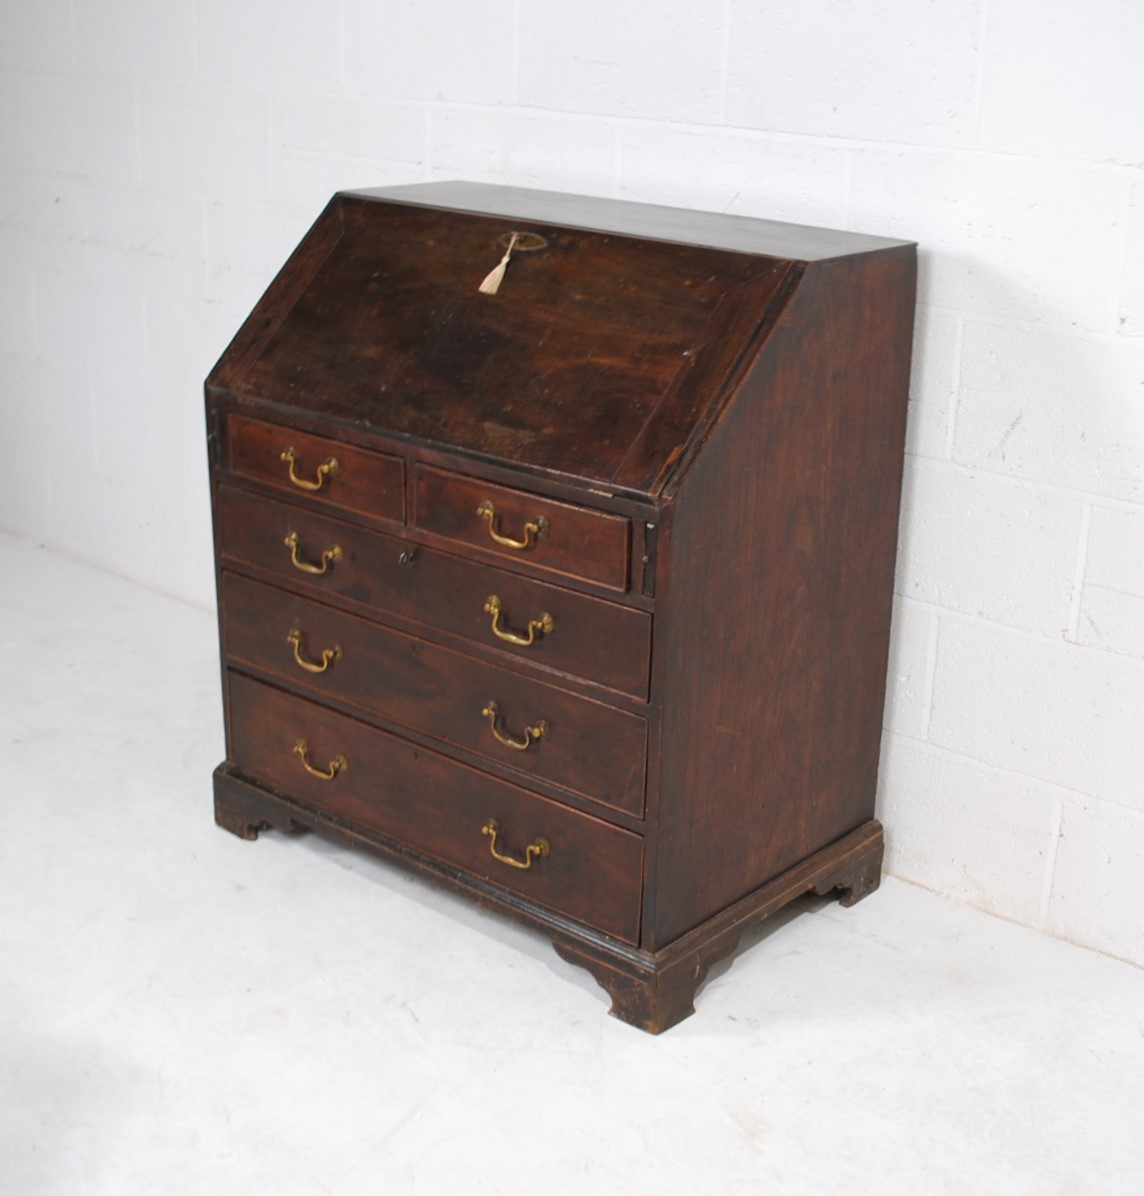 A Georgian mahogany bureau, with five drawers with brass handles, raised on bracket feet, with - Image 2 of 9